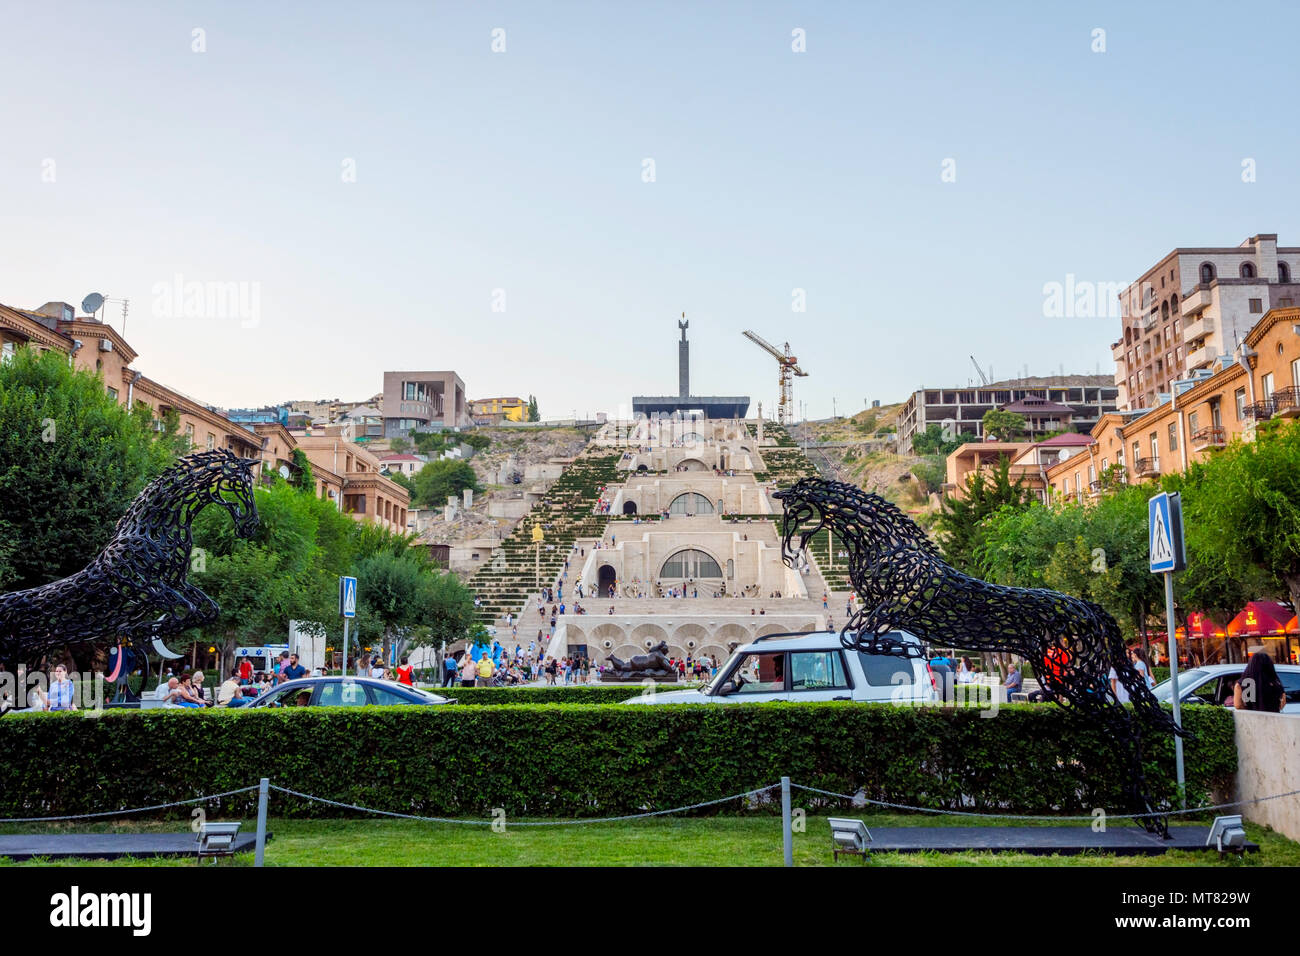 YEREVAN, ARMENIA - AUGUST 1: View over cascade stairs and Tamanyan park, famous spot in Yerevan, Armenia. August 2017 Stock Photo